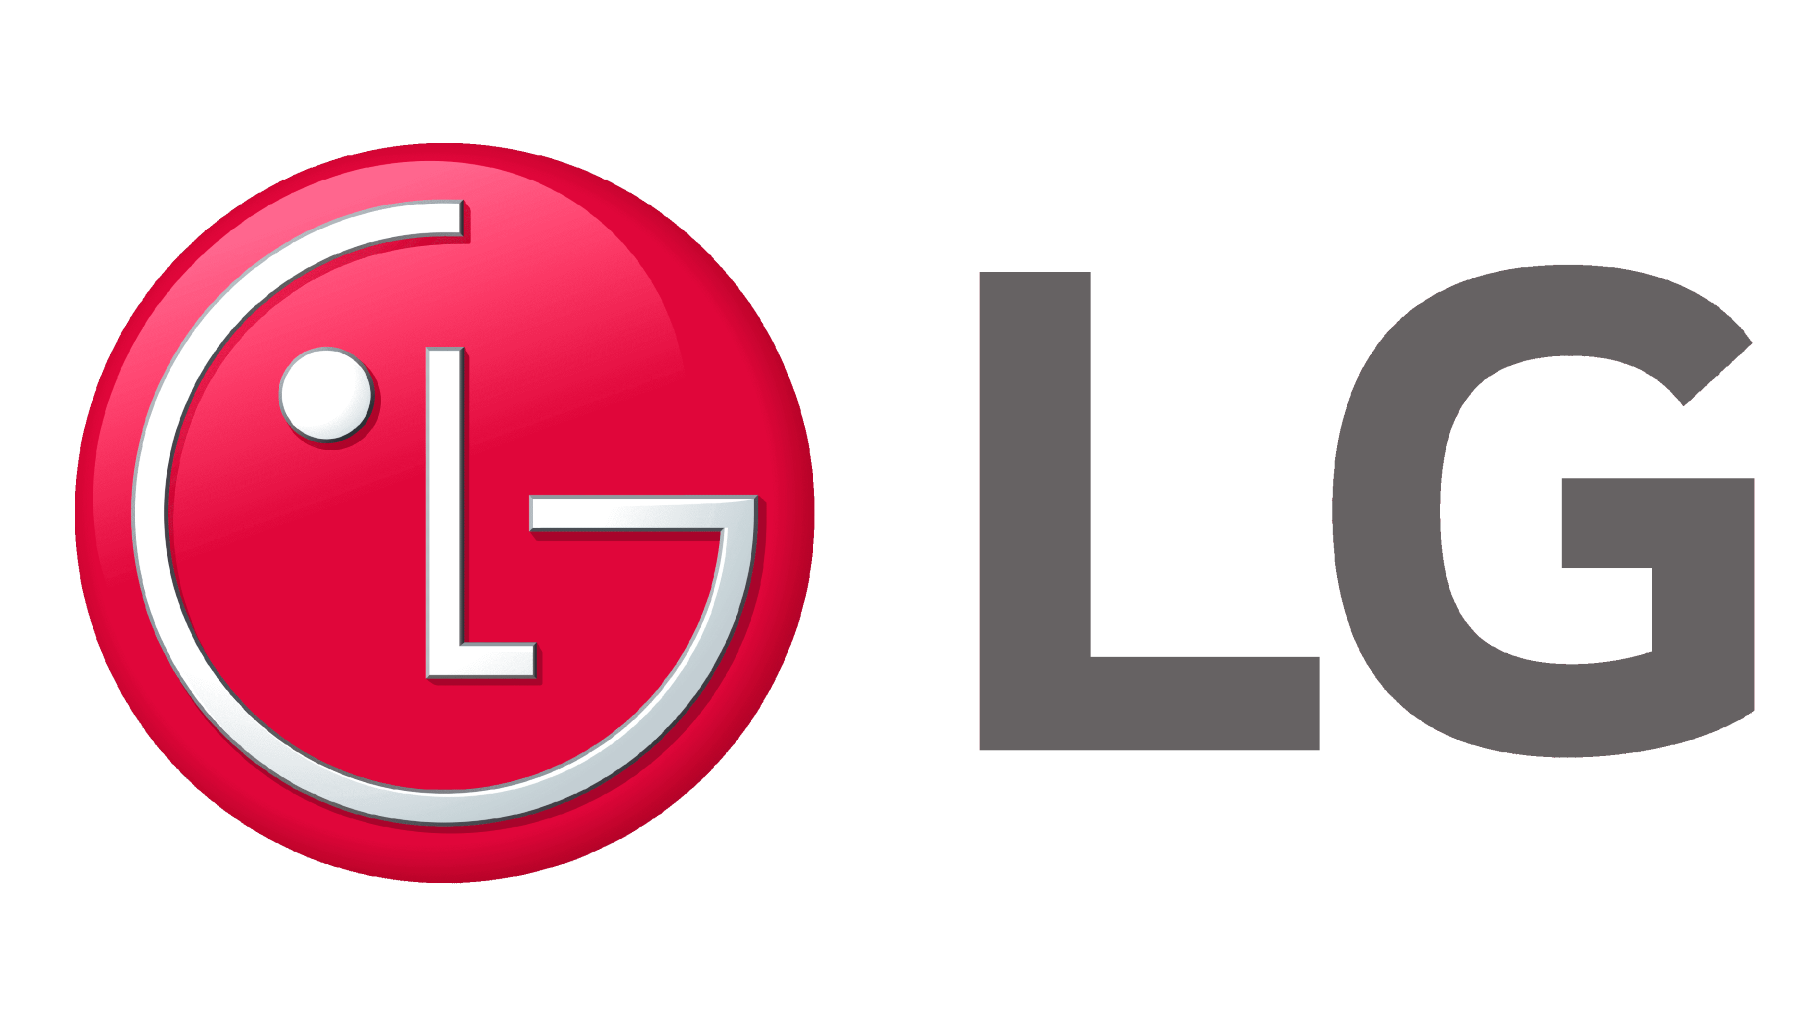 LG Induction Cooktops, Ranges First in Industry Certified to New Energy Star Specs